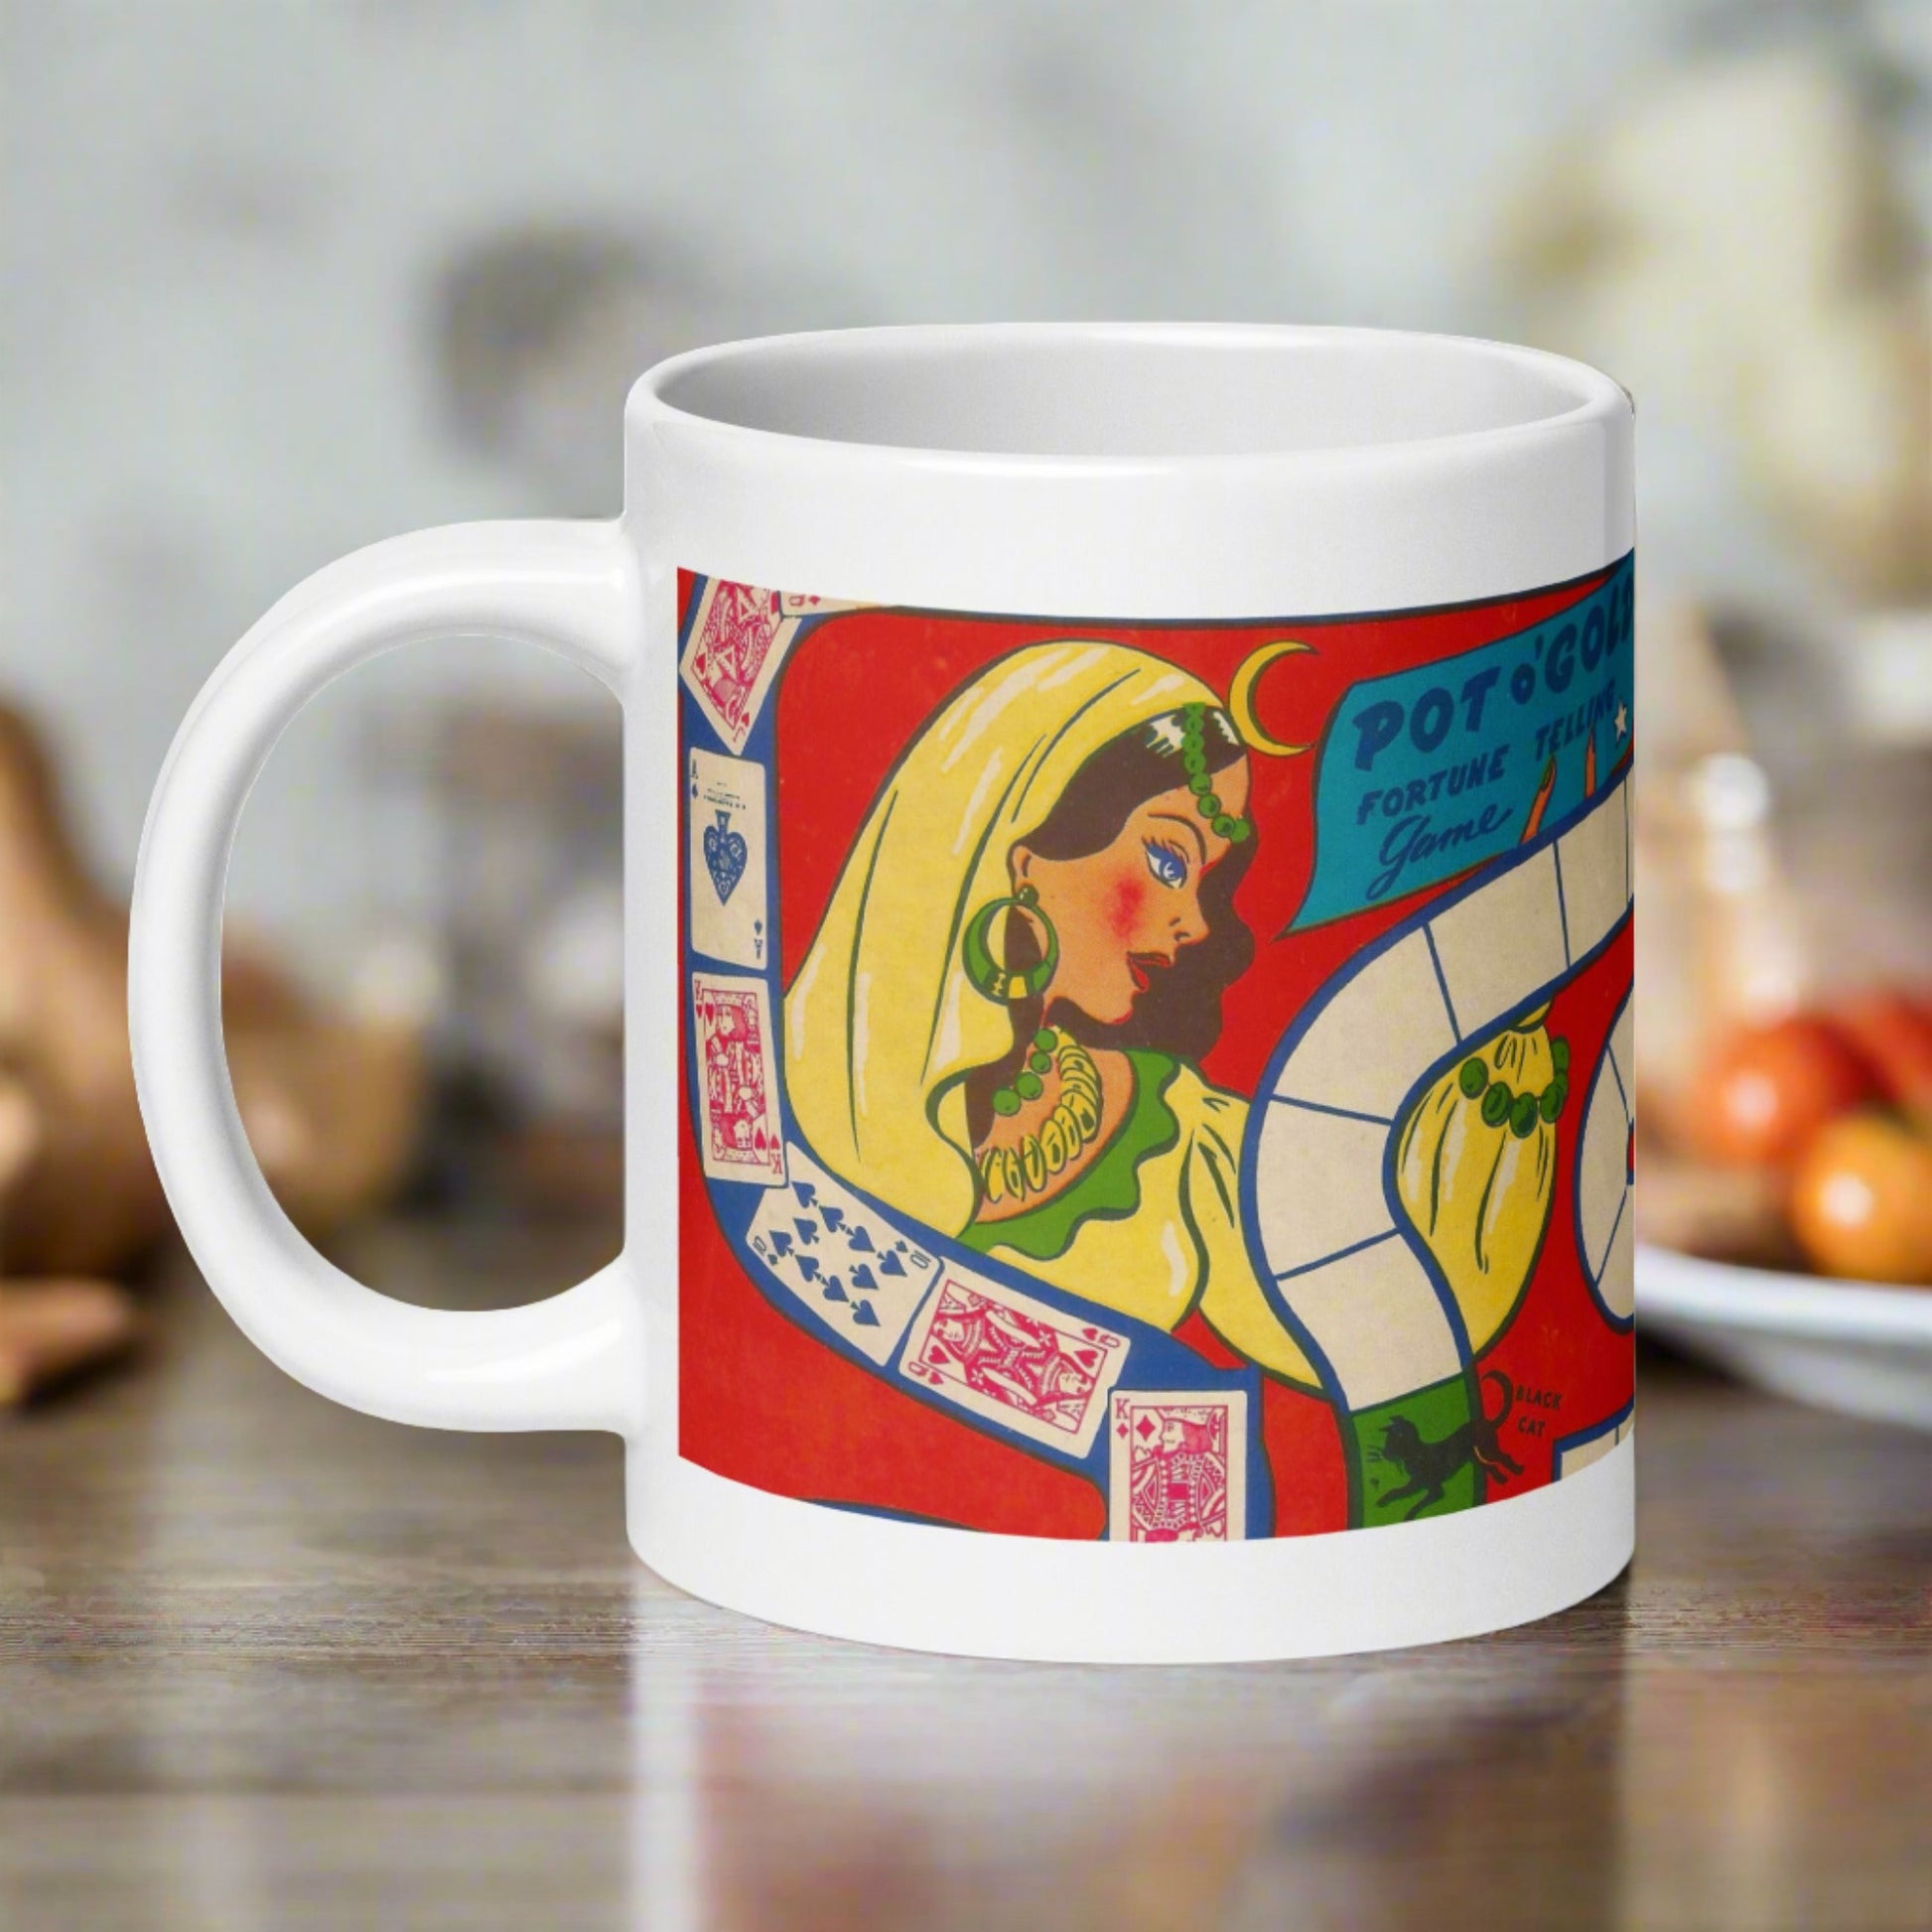 This ceramic glossy coffee mug features a vintage Halloween illustration of a Pot O'Gold Fortune Telling Game. It features a celestial fortune teller dressed in yellow with cards and a board game path.